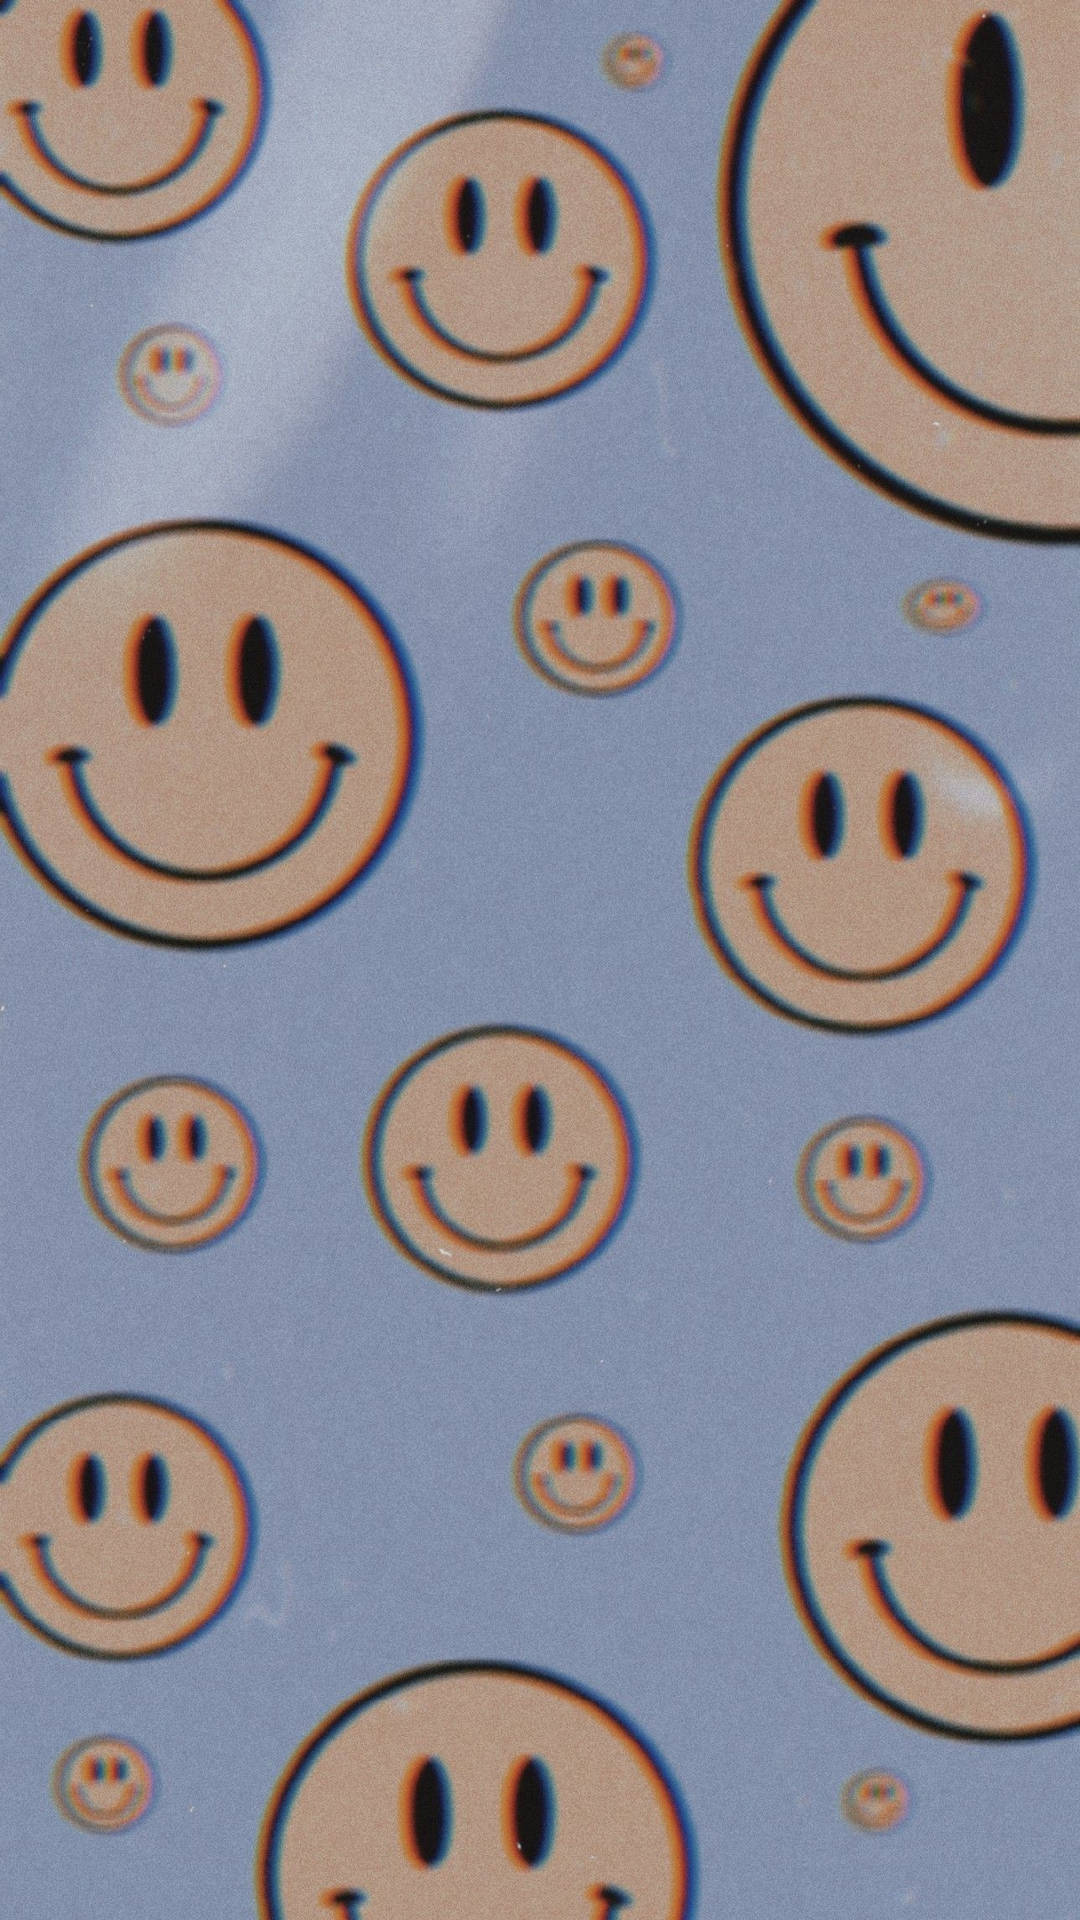 Aesthetic Profile Pictures Of Smiley